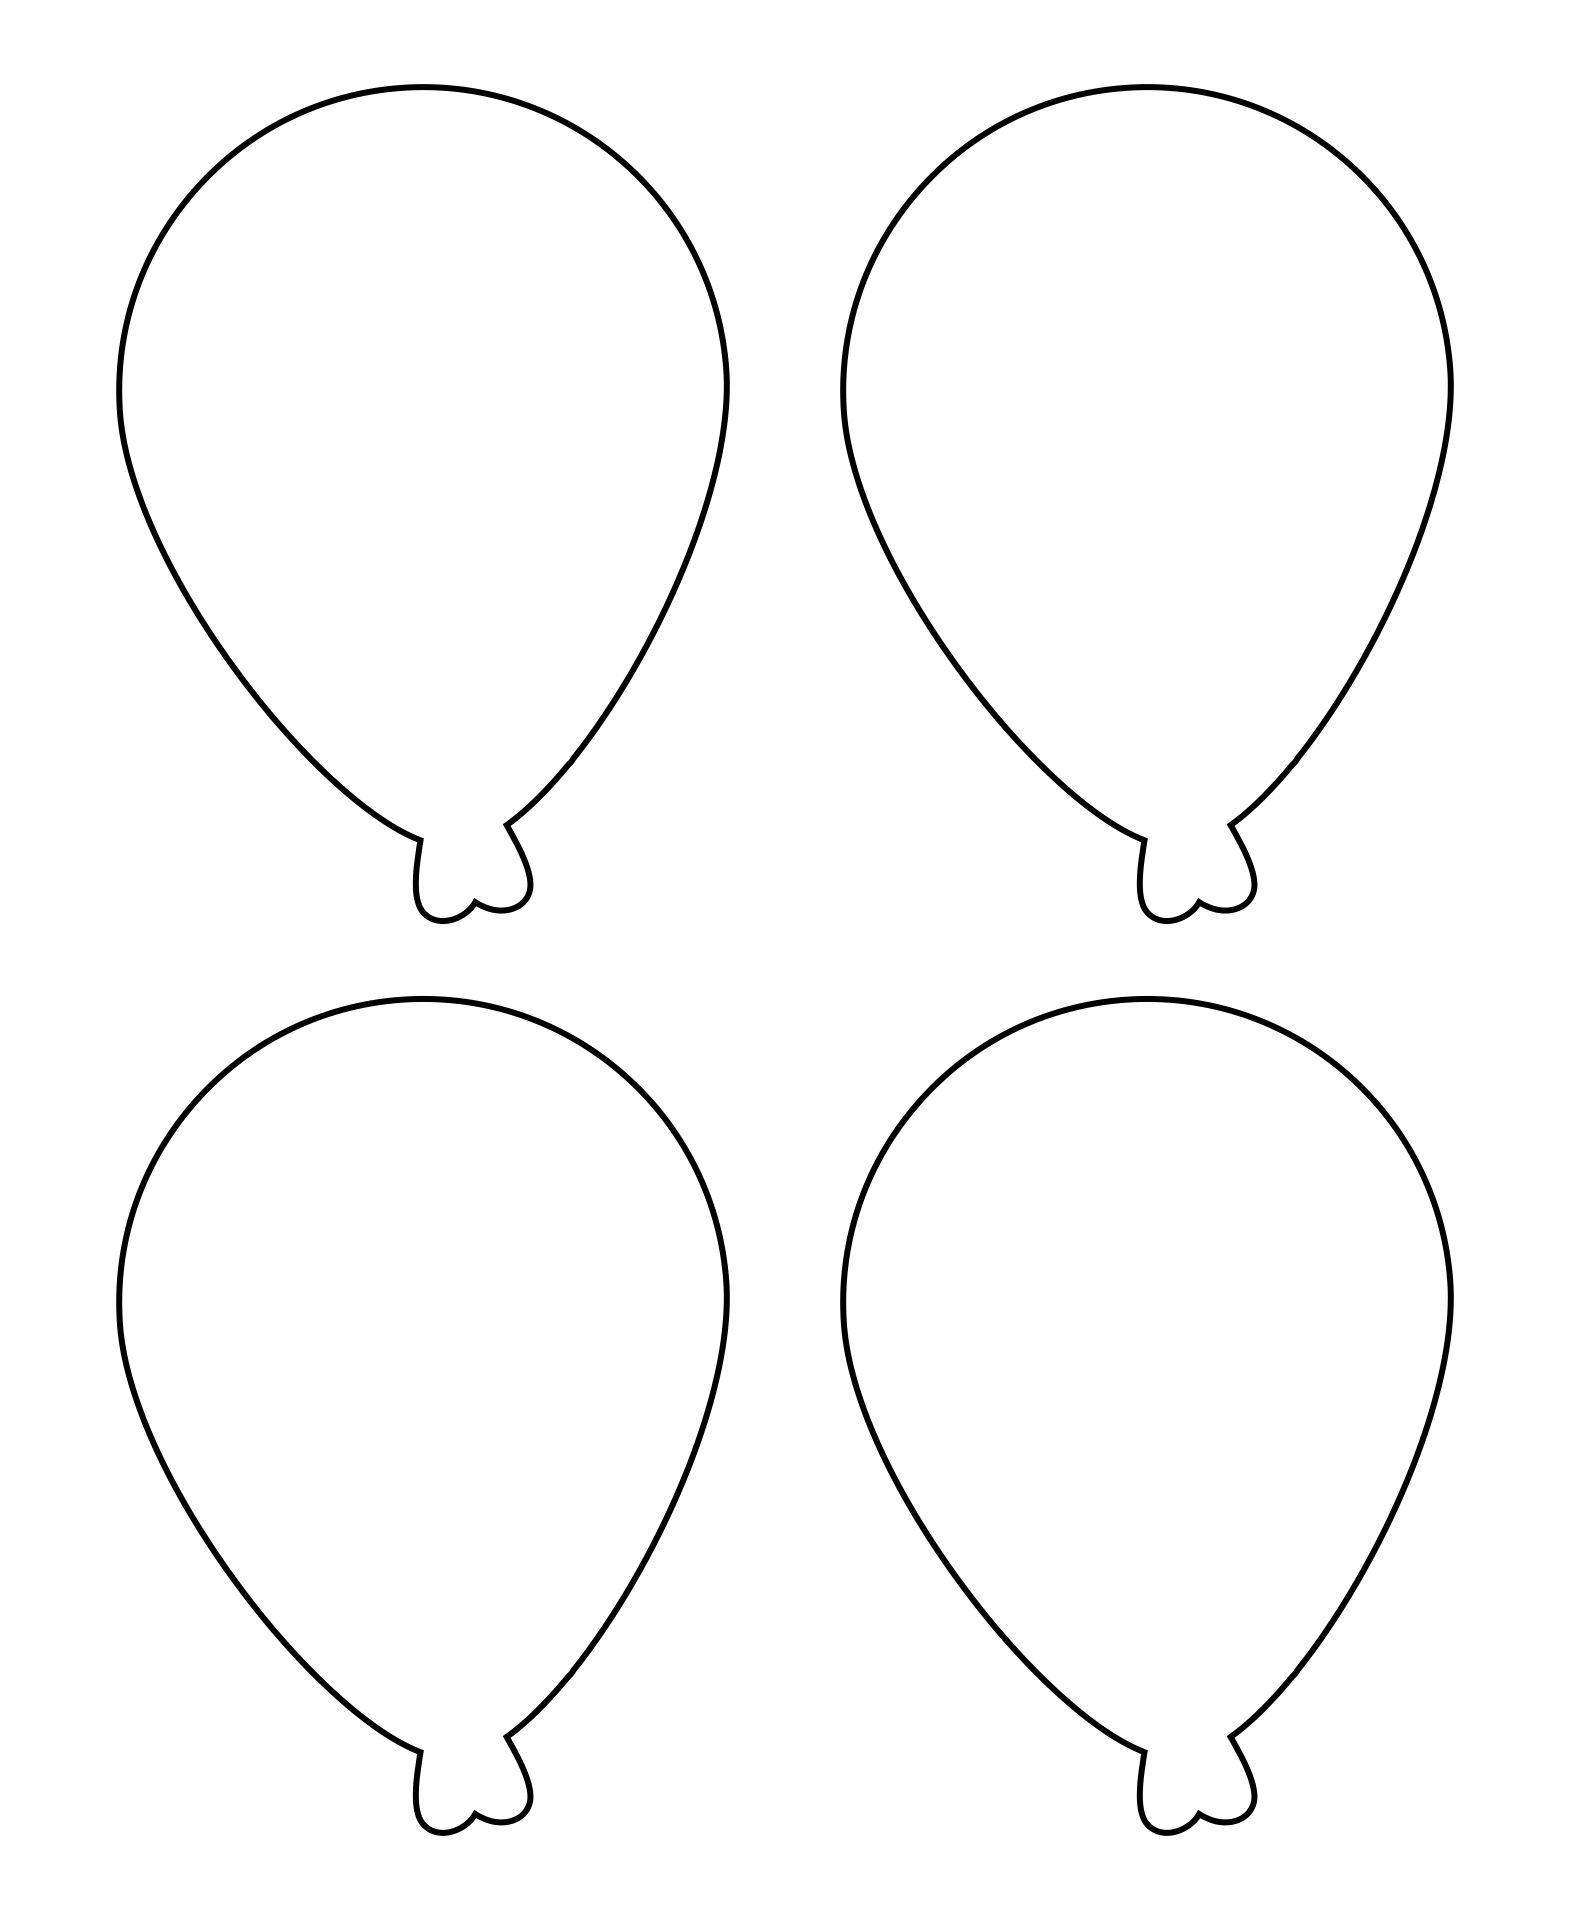 8 Best Images of Printable Balloon Cutouts Balloon Shape Template